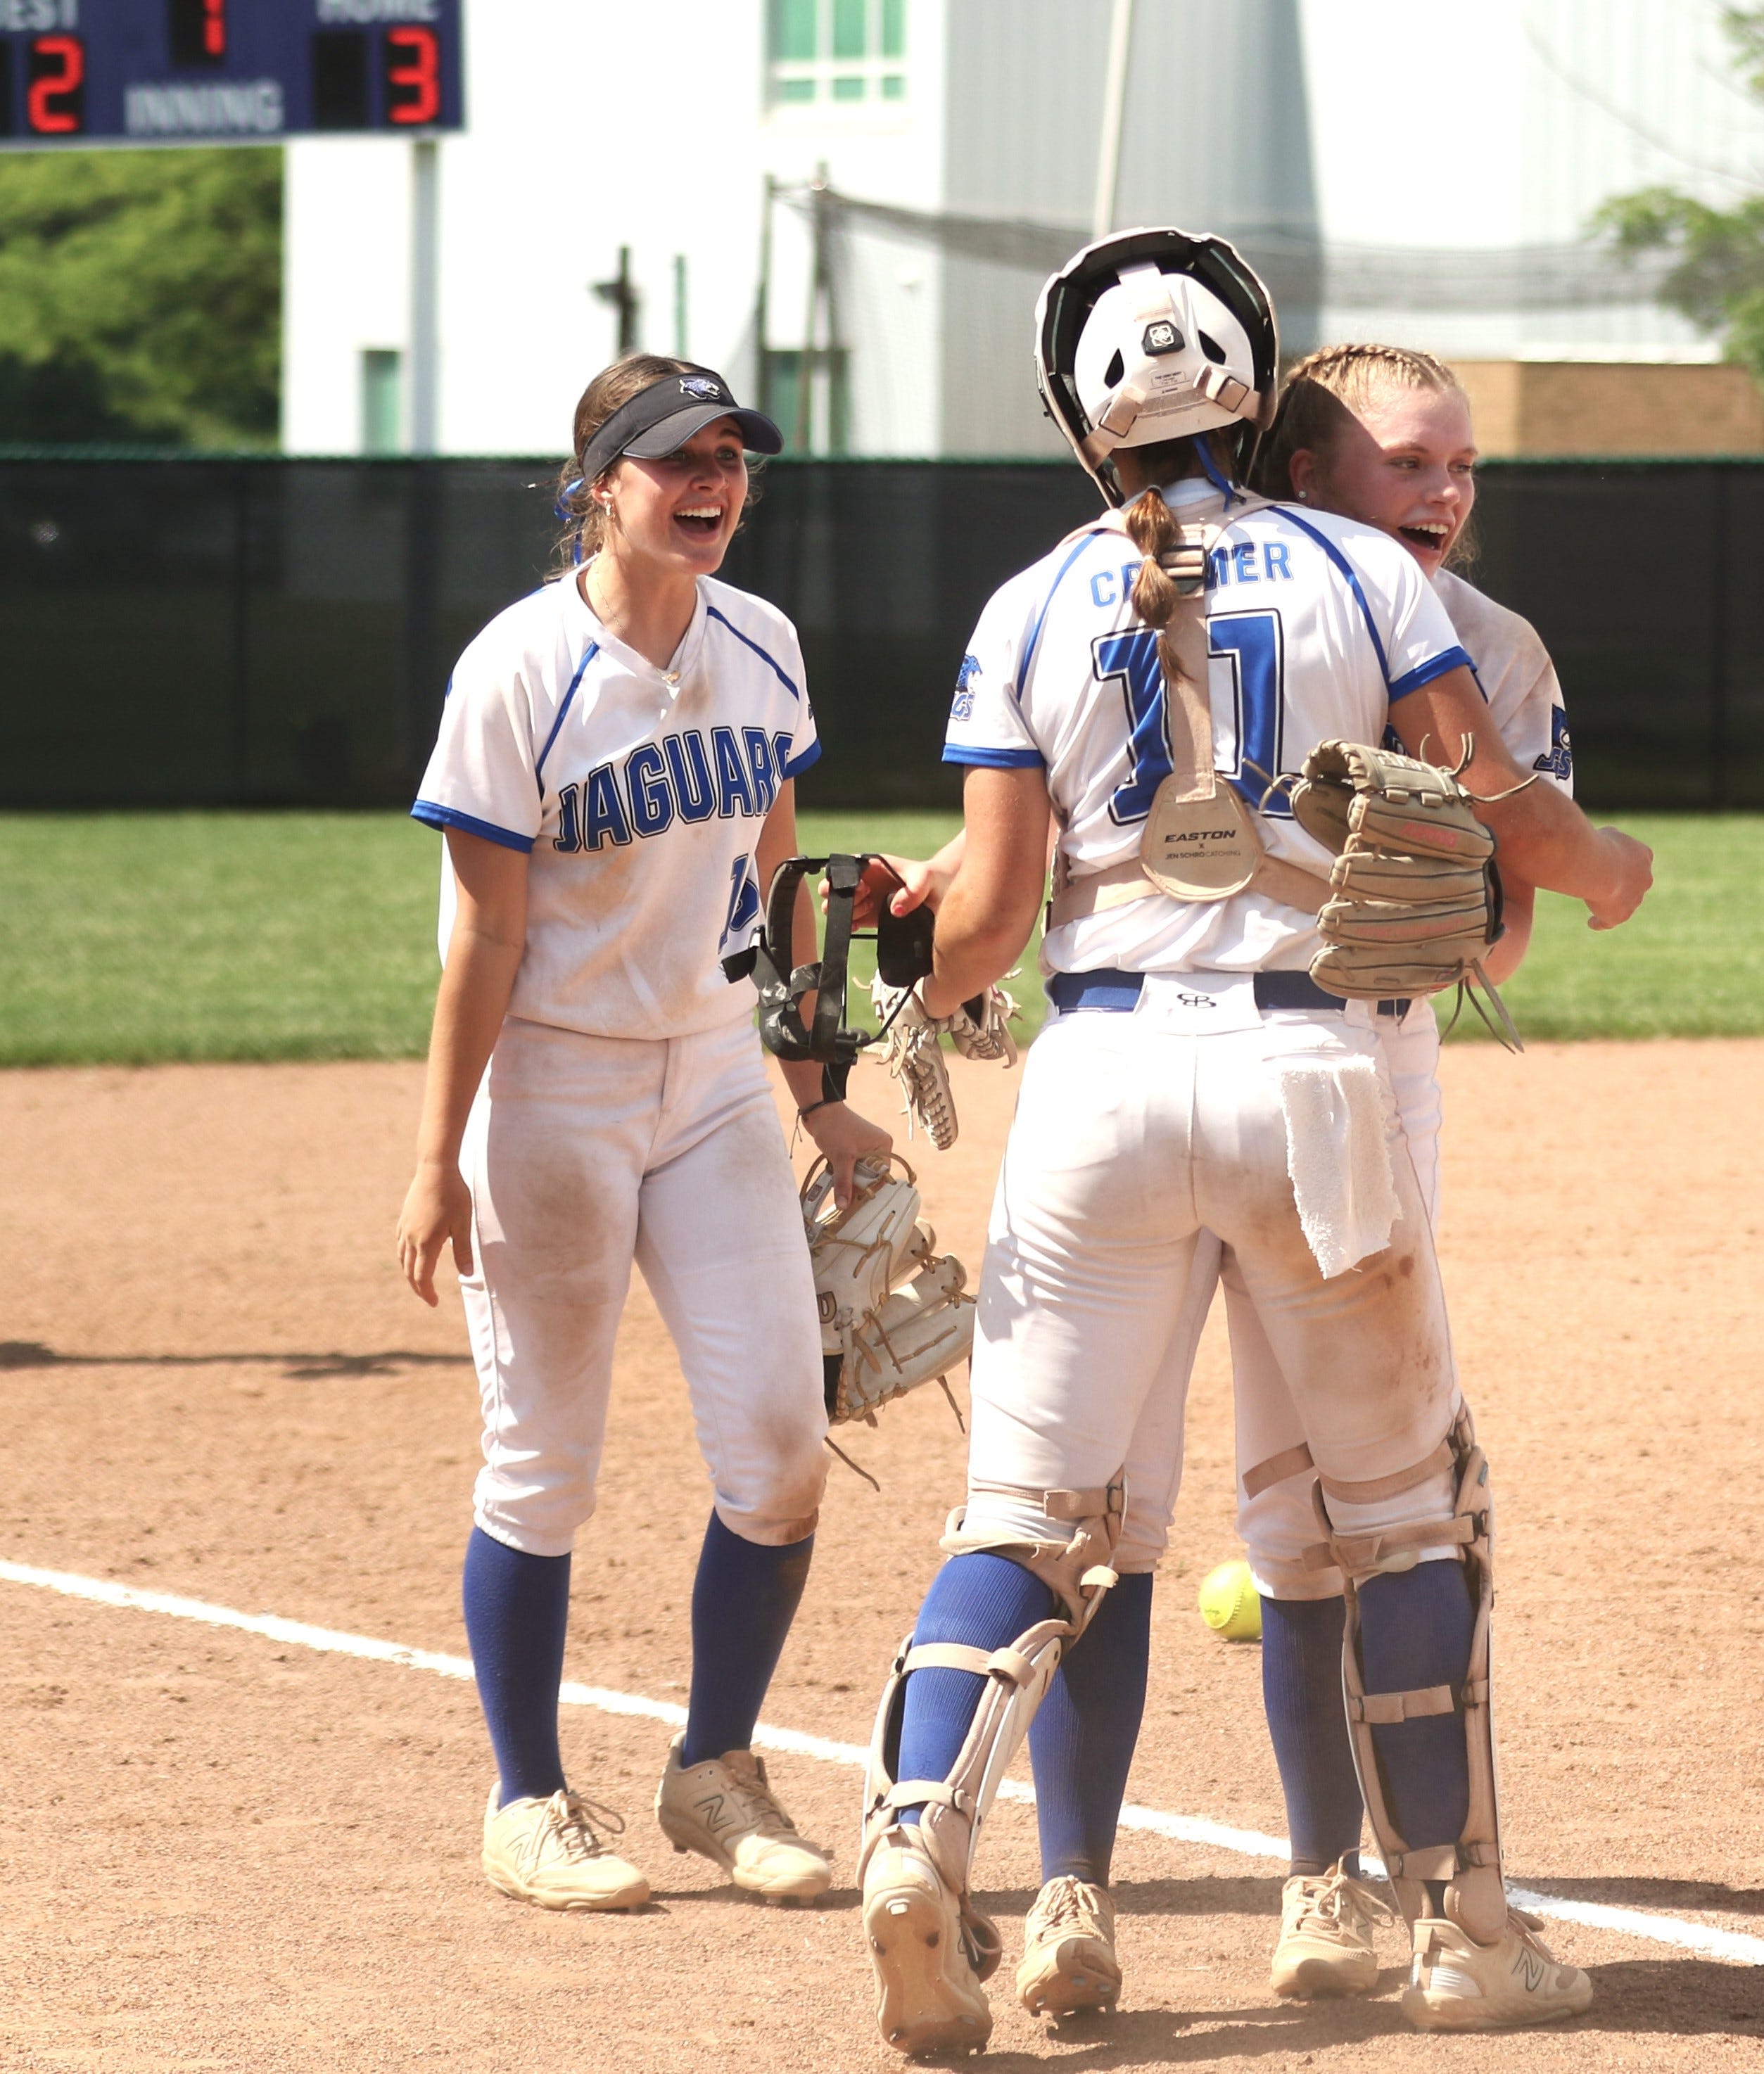 9 central Ohio softball teams ready for OHSAA regional: Here's a look at the field